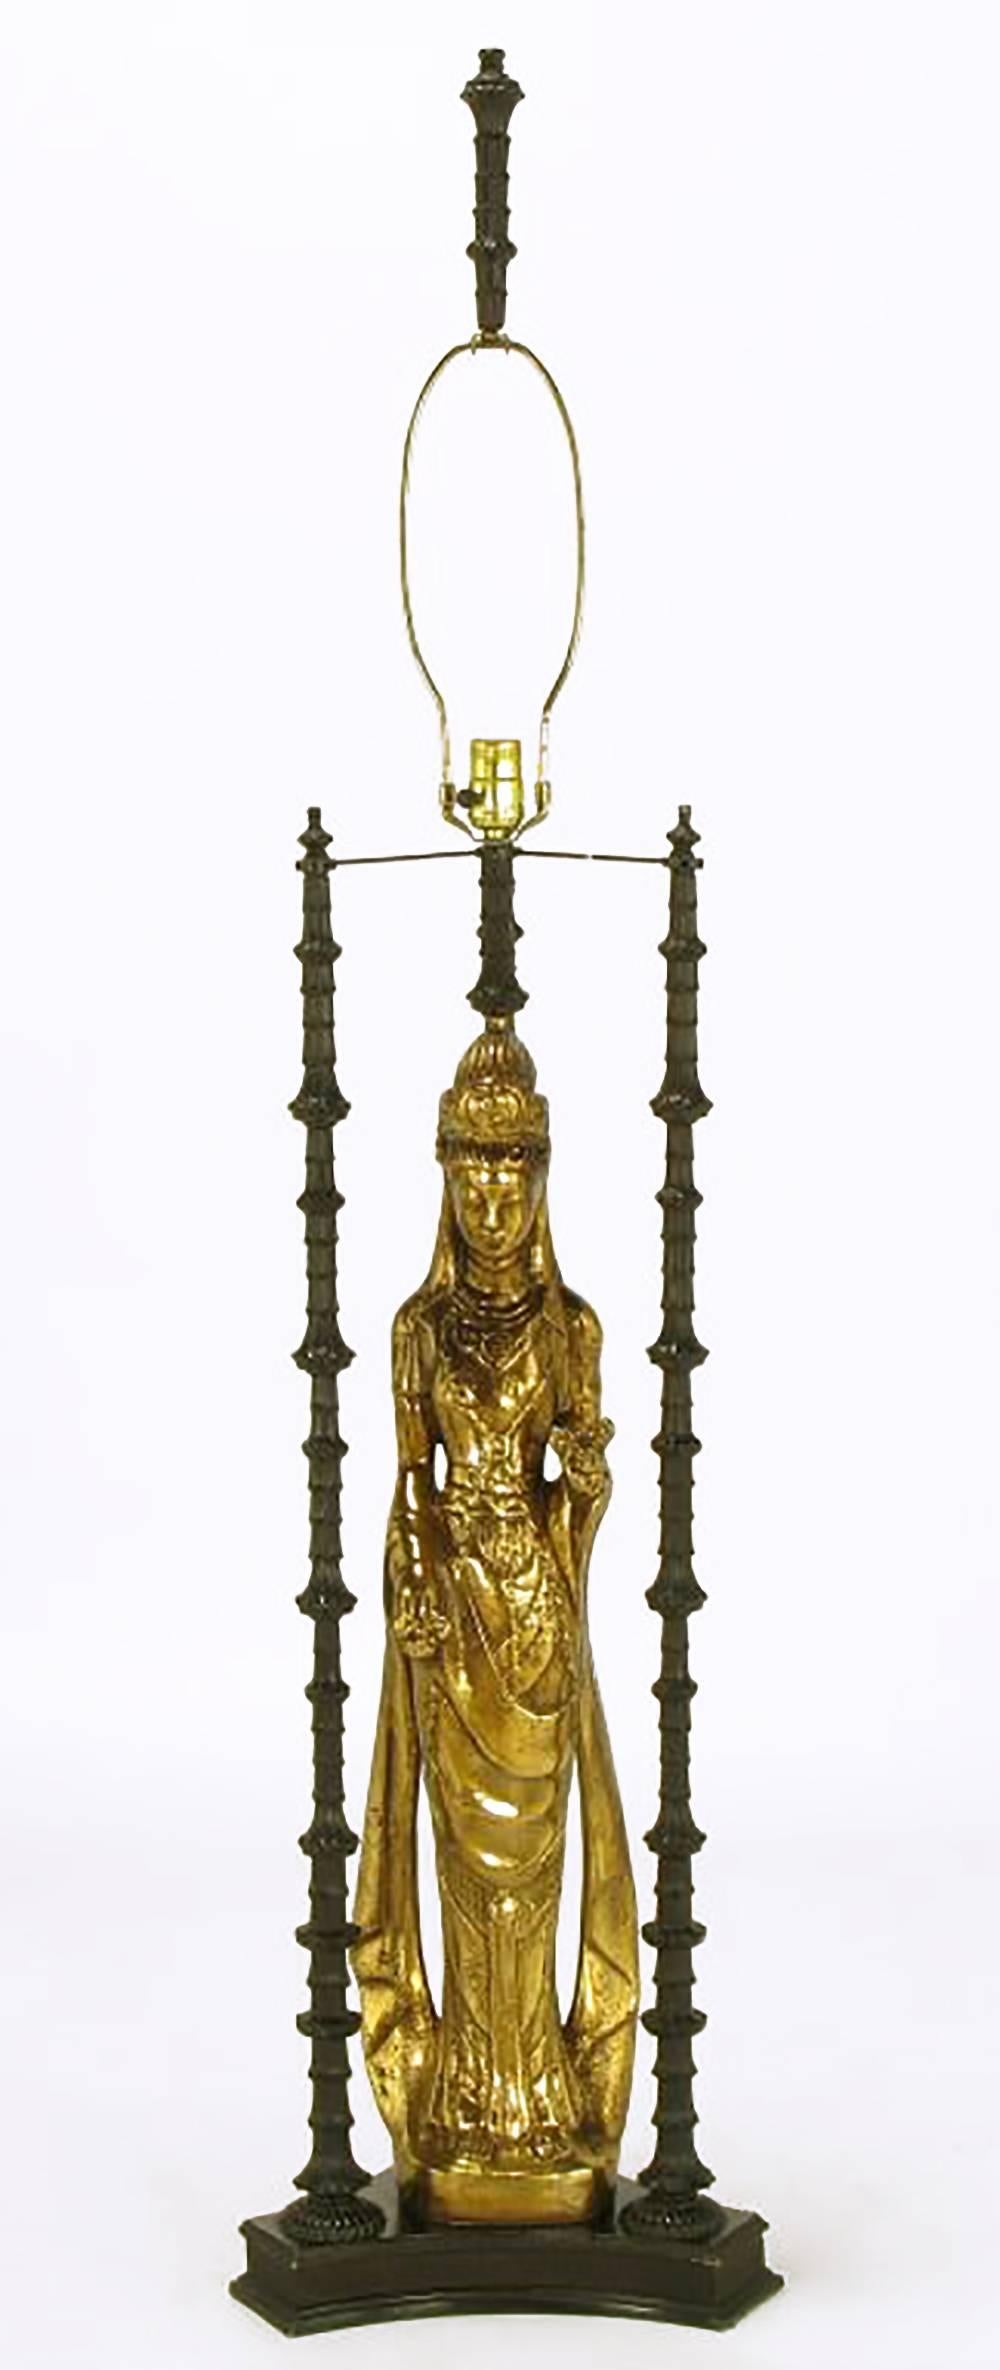 In the manner of James Mont or Tony Duquette, this 55 inch tall lamp contains a doré bronze statue of Quan Yin a/k/a Kuan Yin a/k/a Guanyin, the Chinese goddess of mercy. Lacquered metal three-column shrine surrounds her. This Asian form table lamp